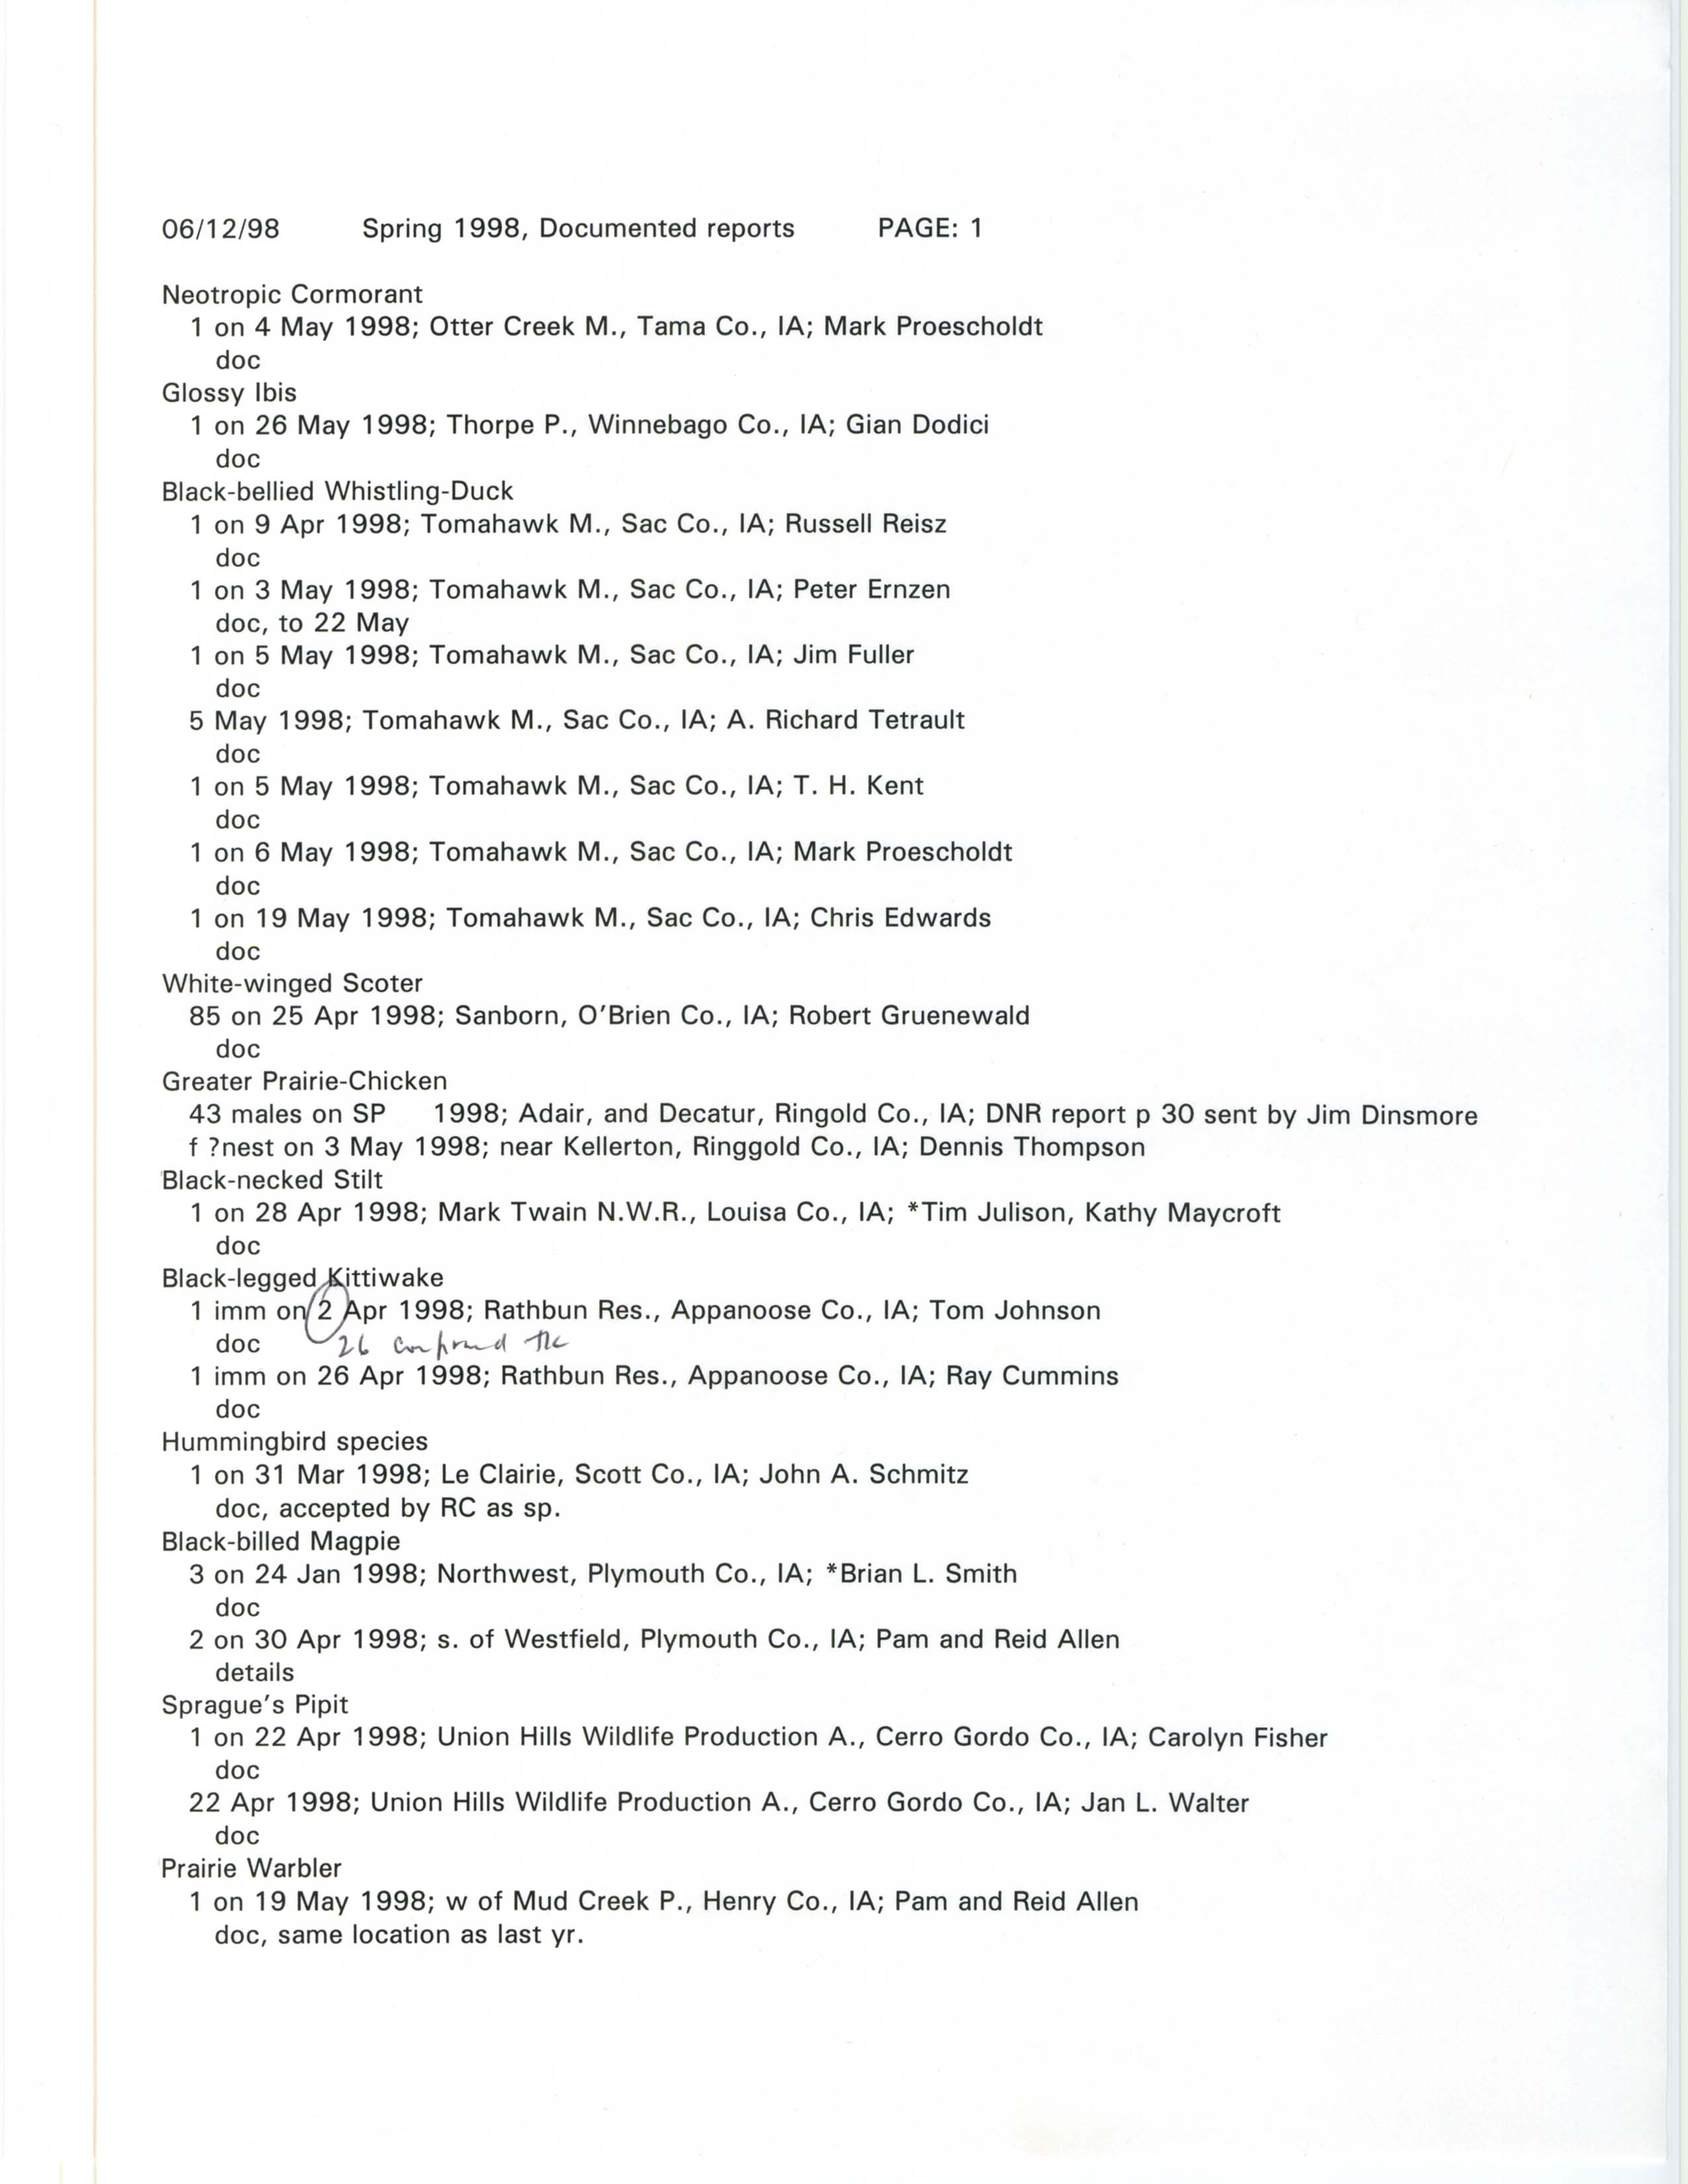 Spring 1998, documented reports, June 12, 1998